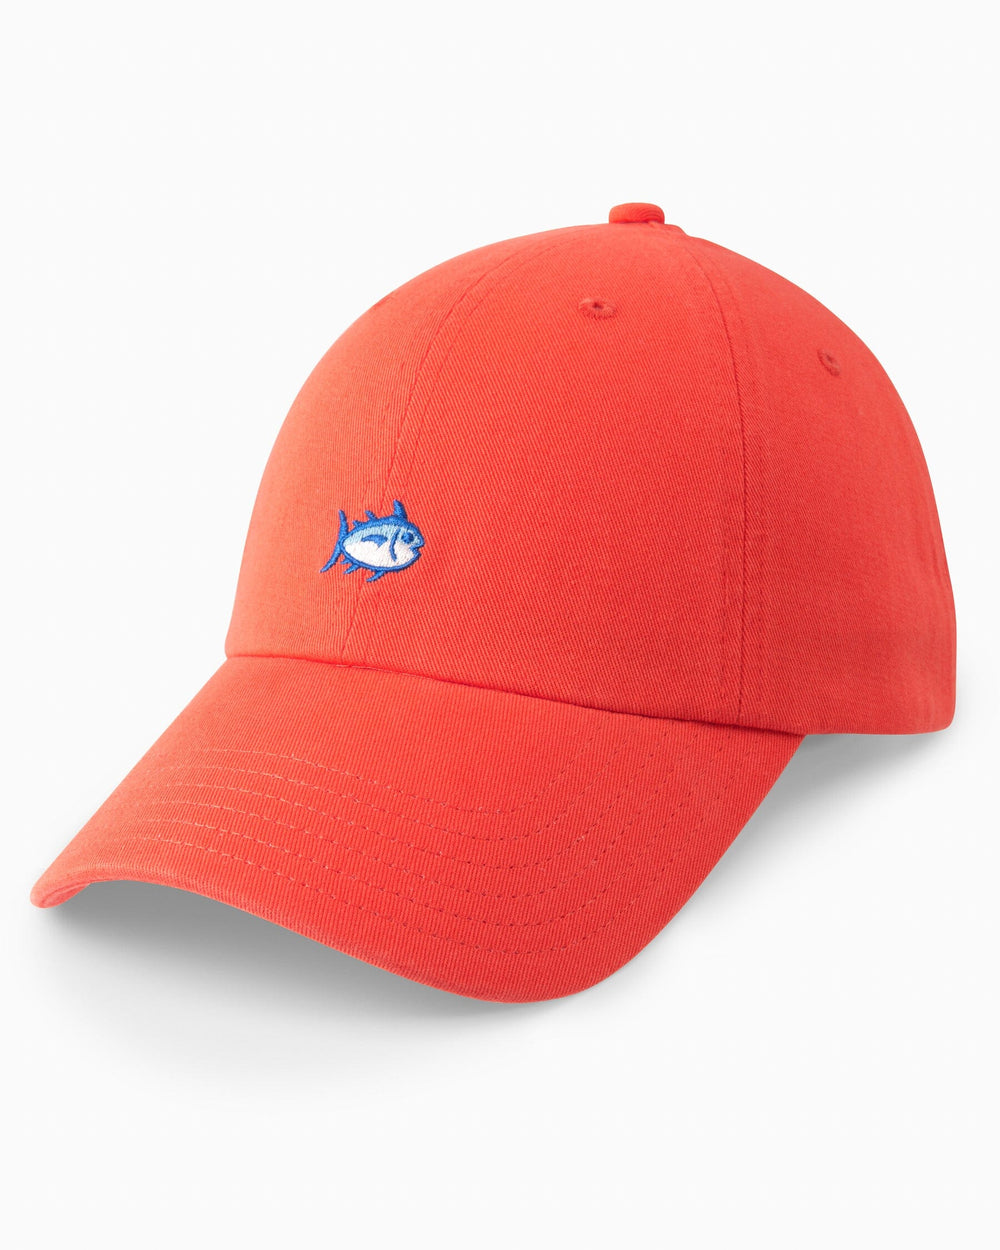 The front view of the Team Colors Skipjack Hat by Southern Tide - Endzone Orange